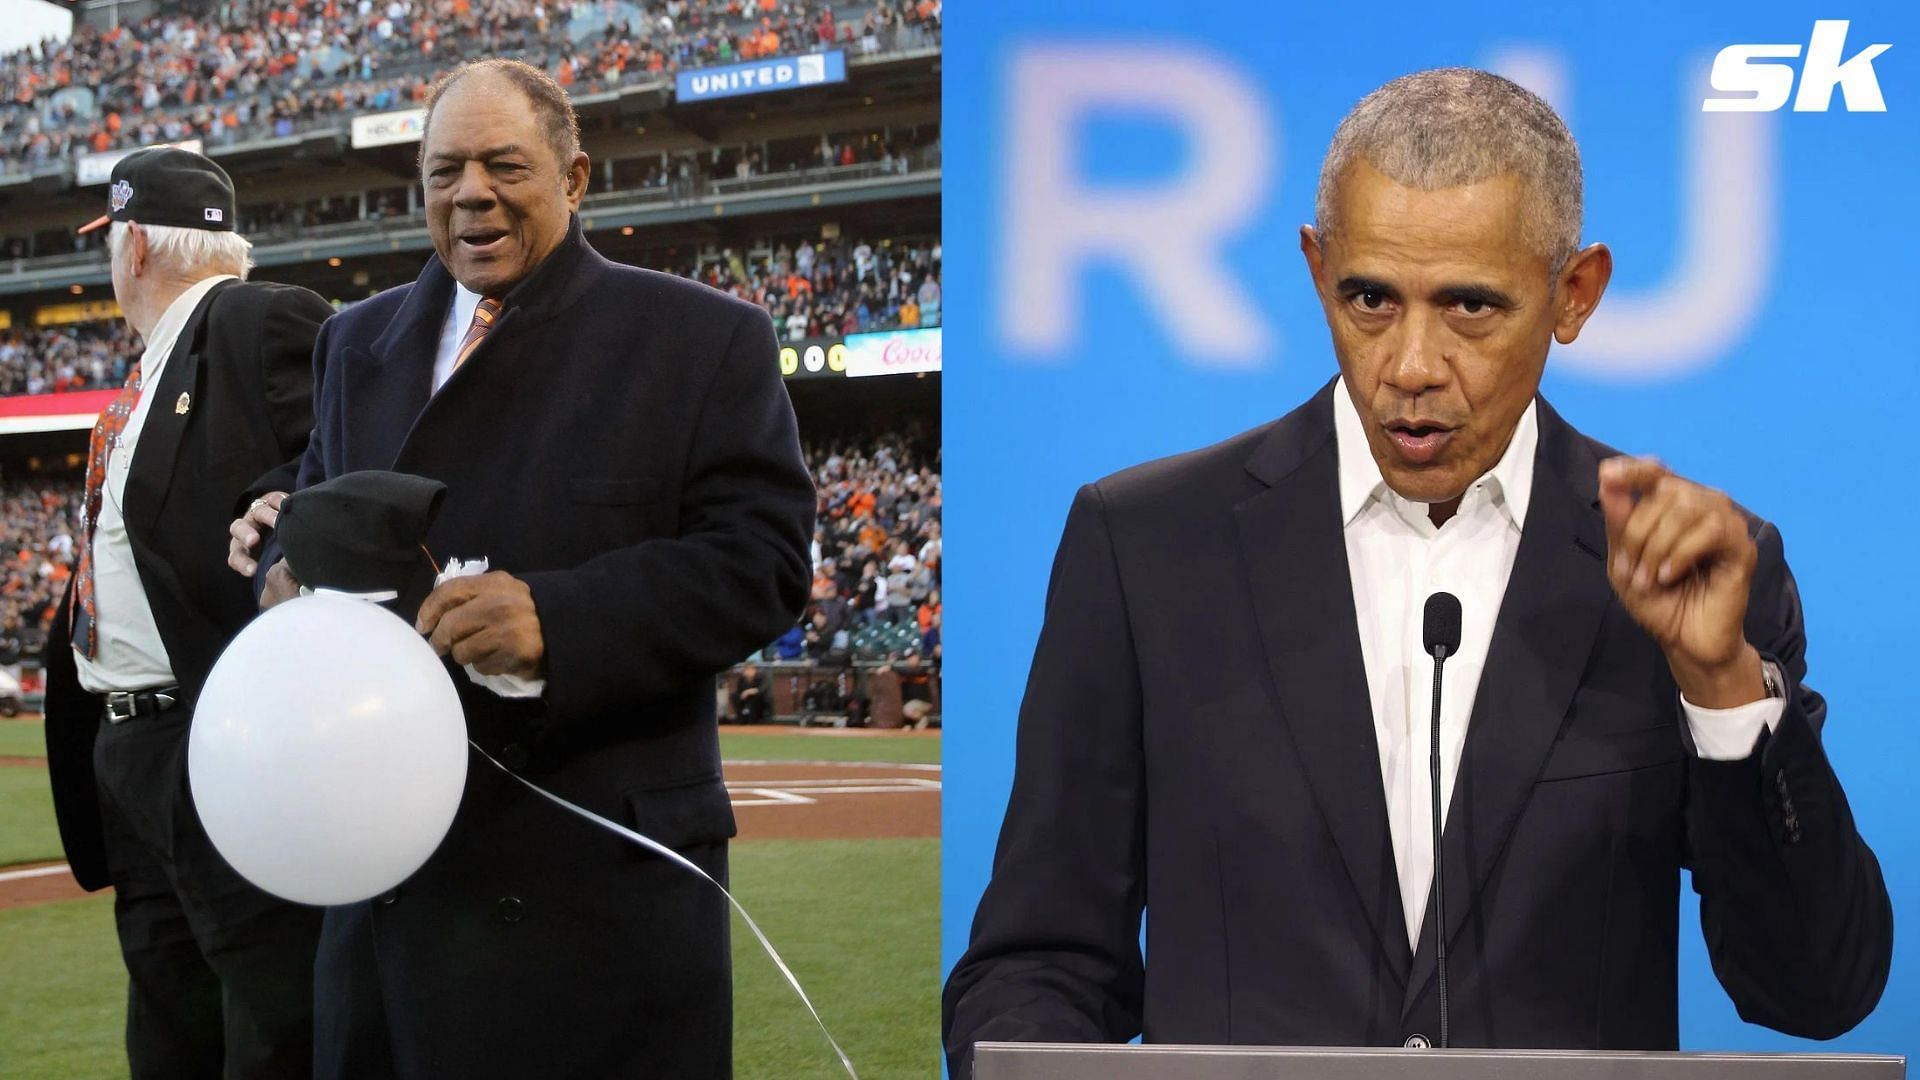 Willie Mays said that he cried when Barack Obama became the President of the United States